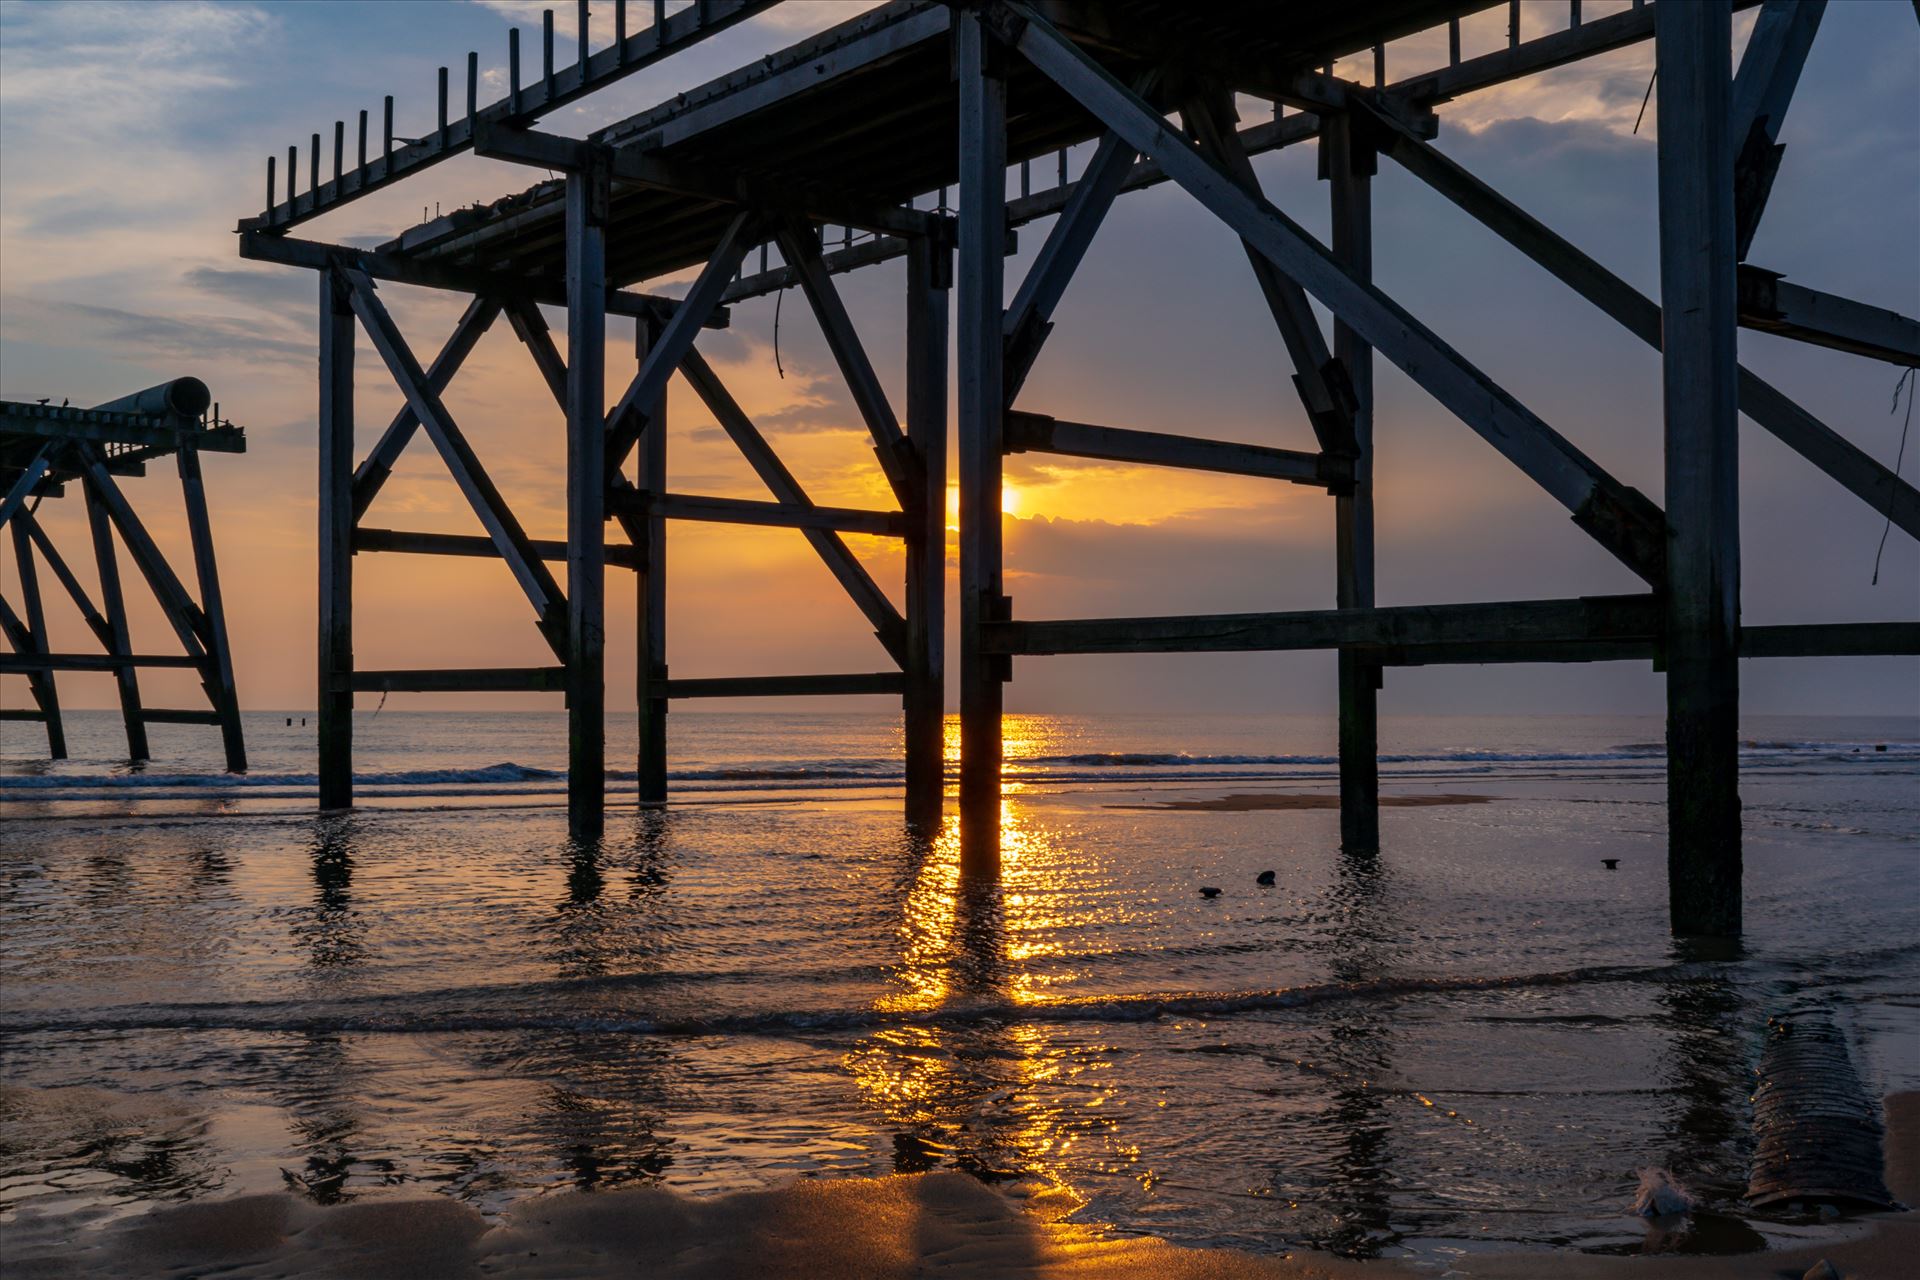 Sunrise Steetley Pier 1 - You have to be up early for a shot like this by AJ Stoves Photography